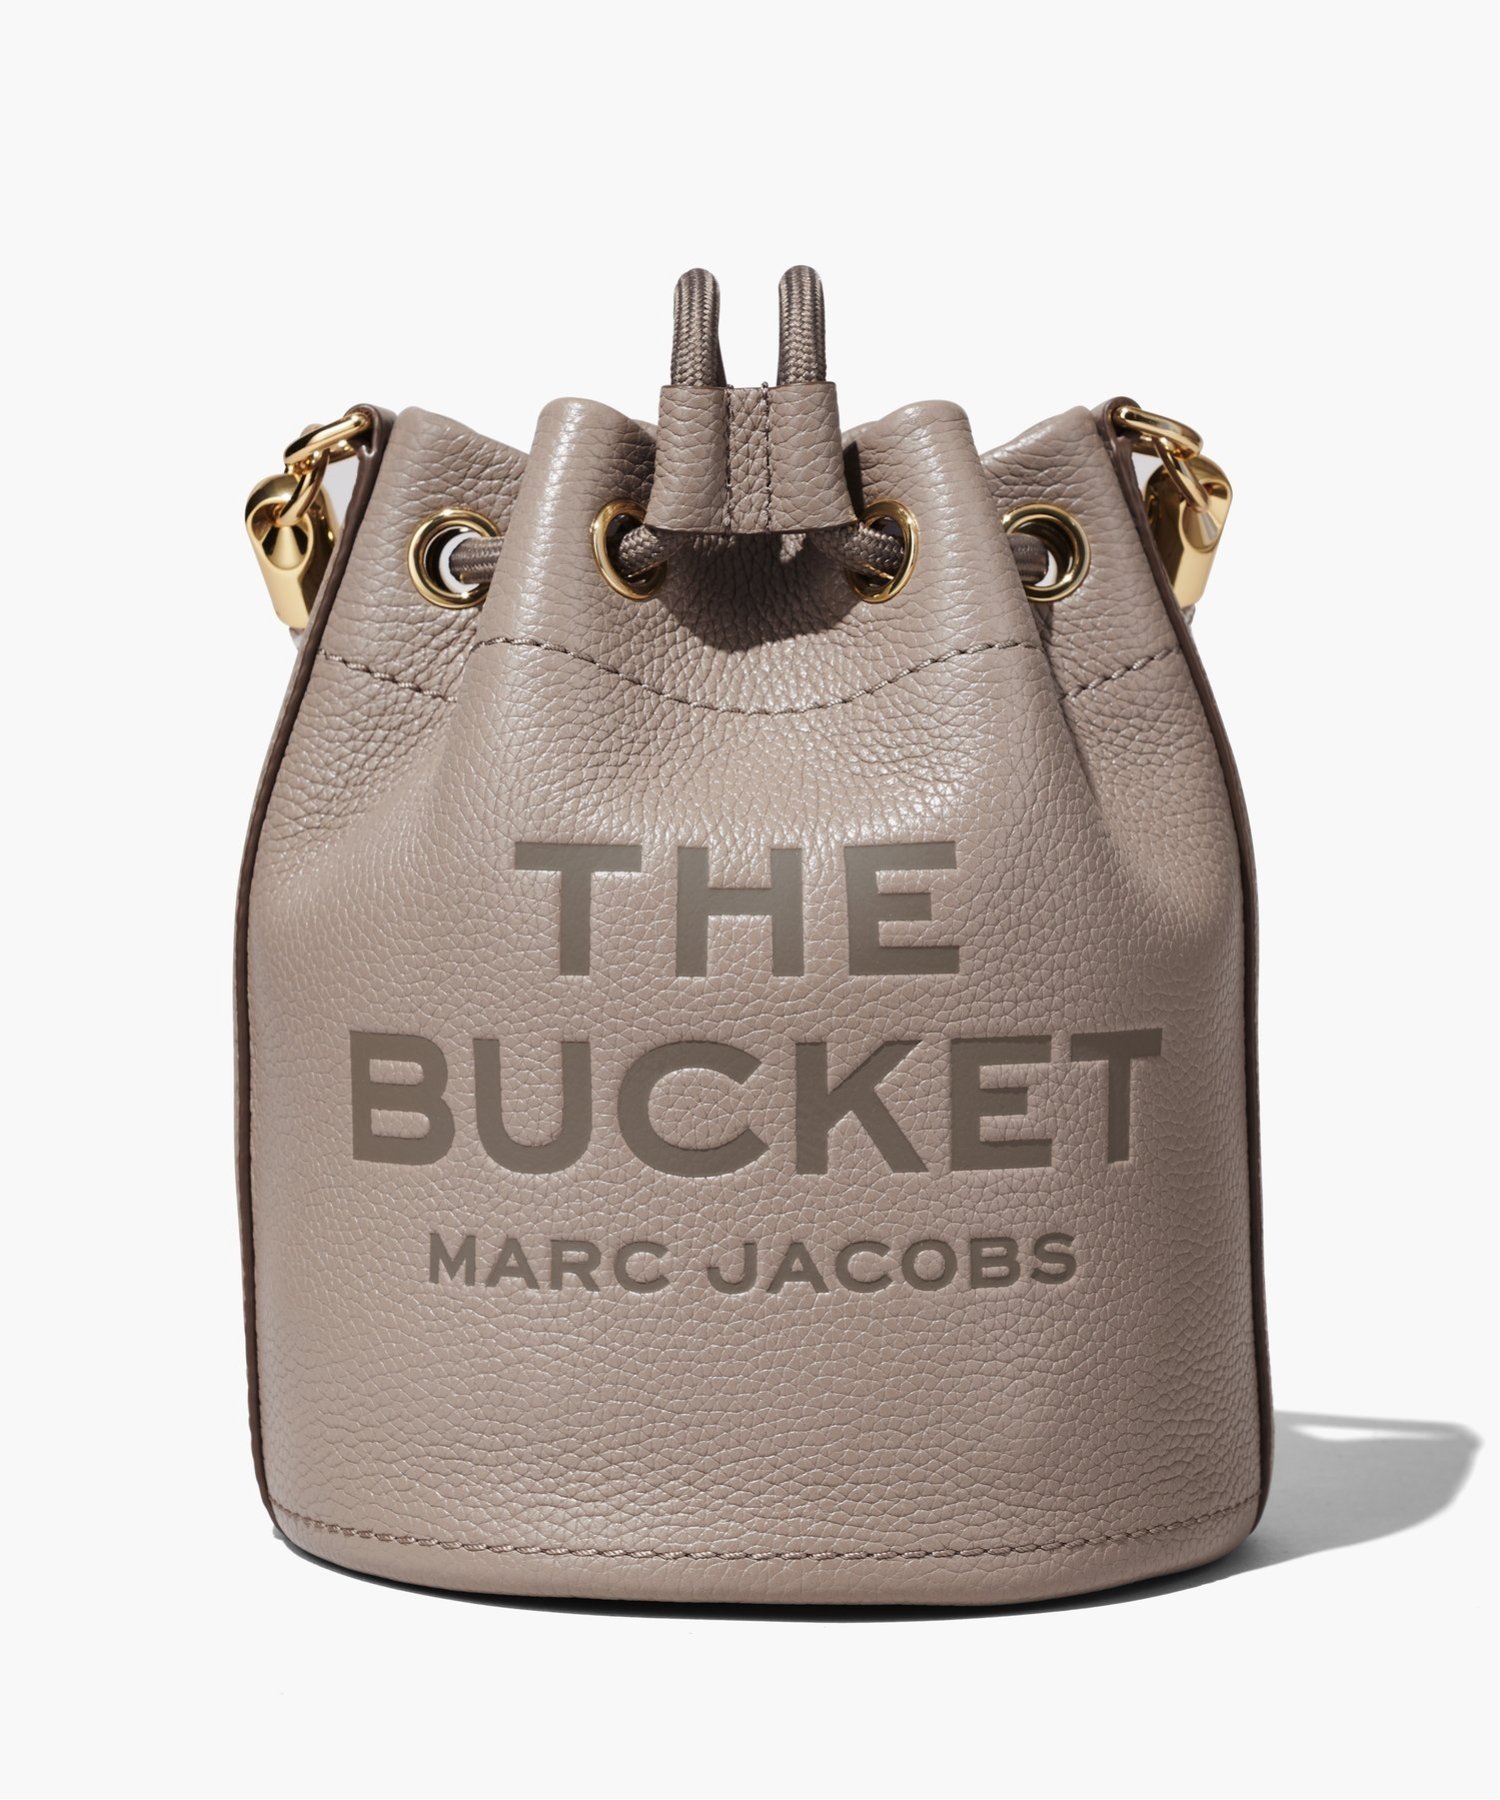 MARC JACOBS 【公式】THE LEATHER BUCKET BAG/ザ レザー バケット